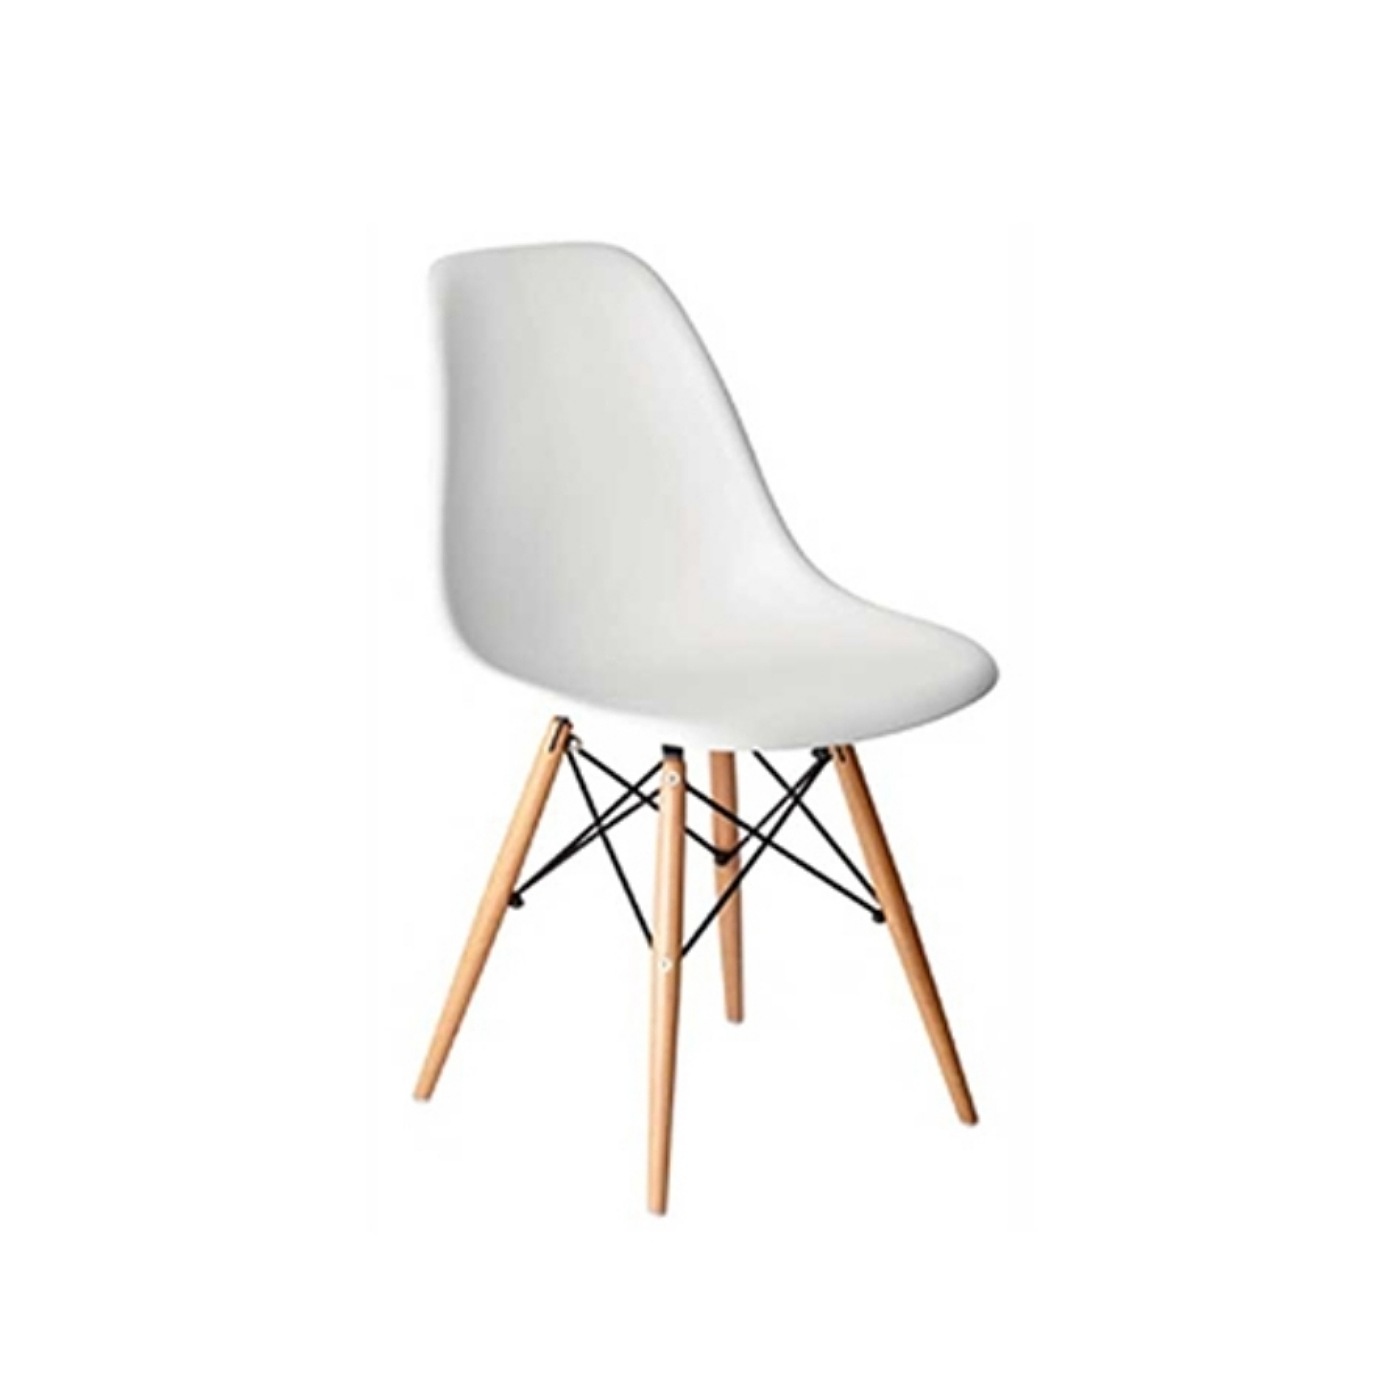 White Emmy Cafe Chair With Wooden Legs And White Seat.